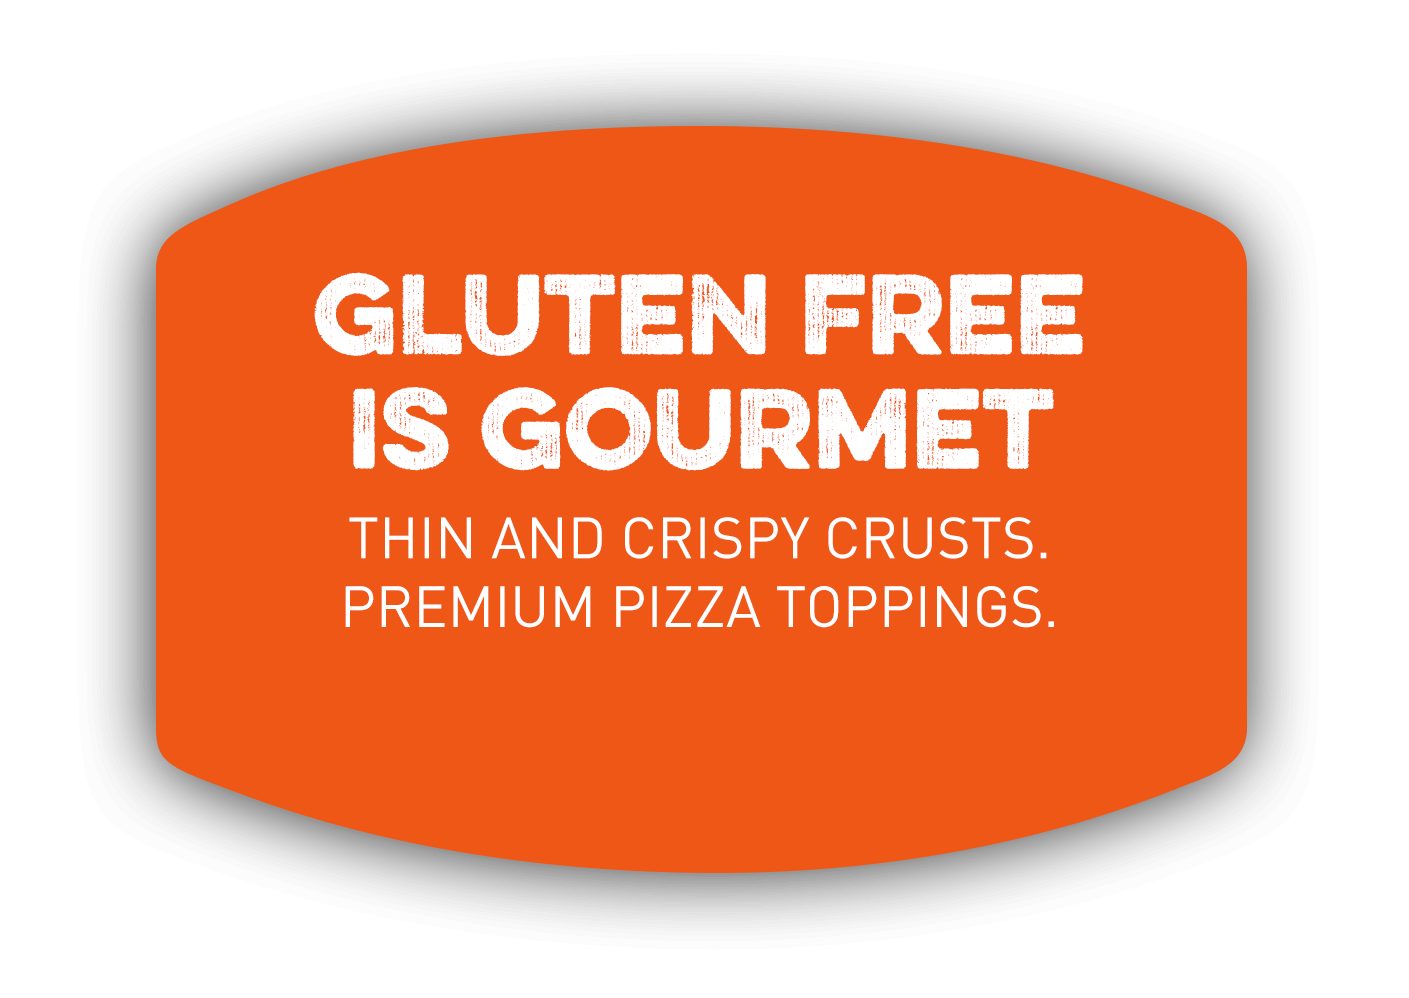 GLUTEN FREE IS GOURMET. Thin and crispy crusts. Premium pizza toppings.